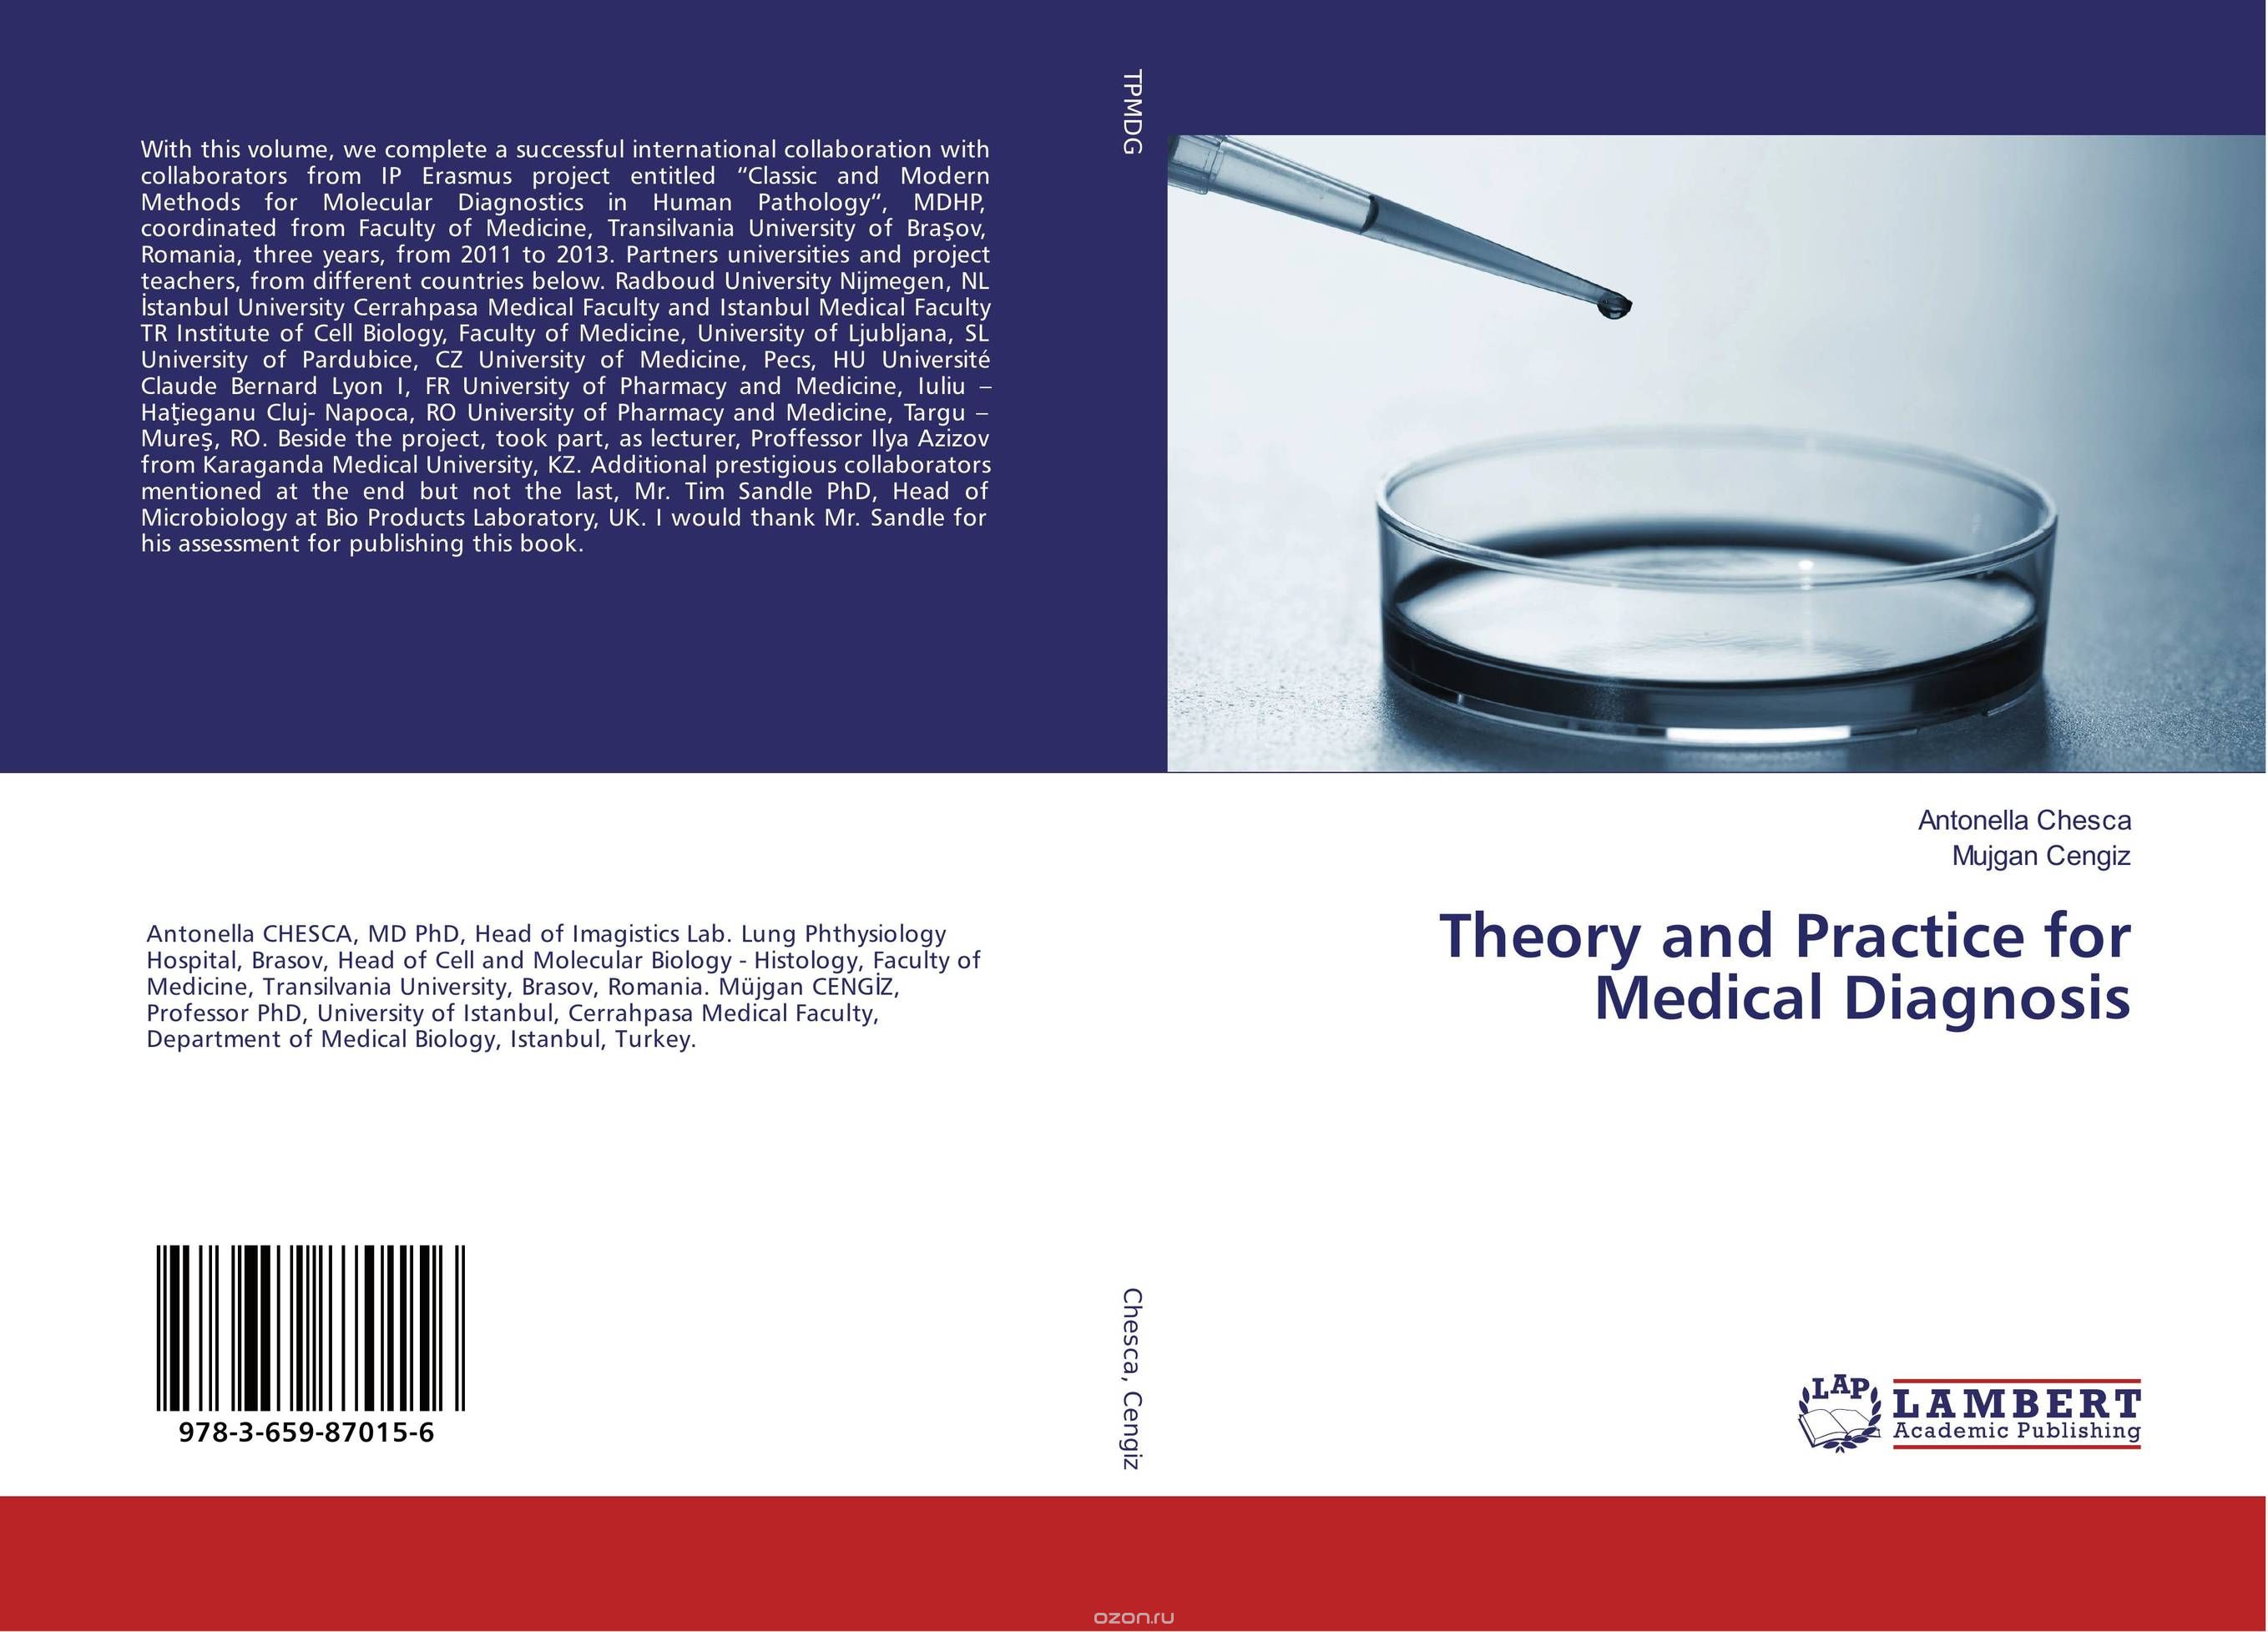 Theory and Practice for Medical Diagnosis